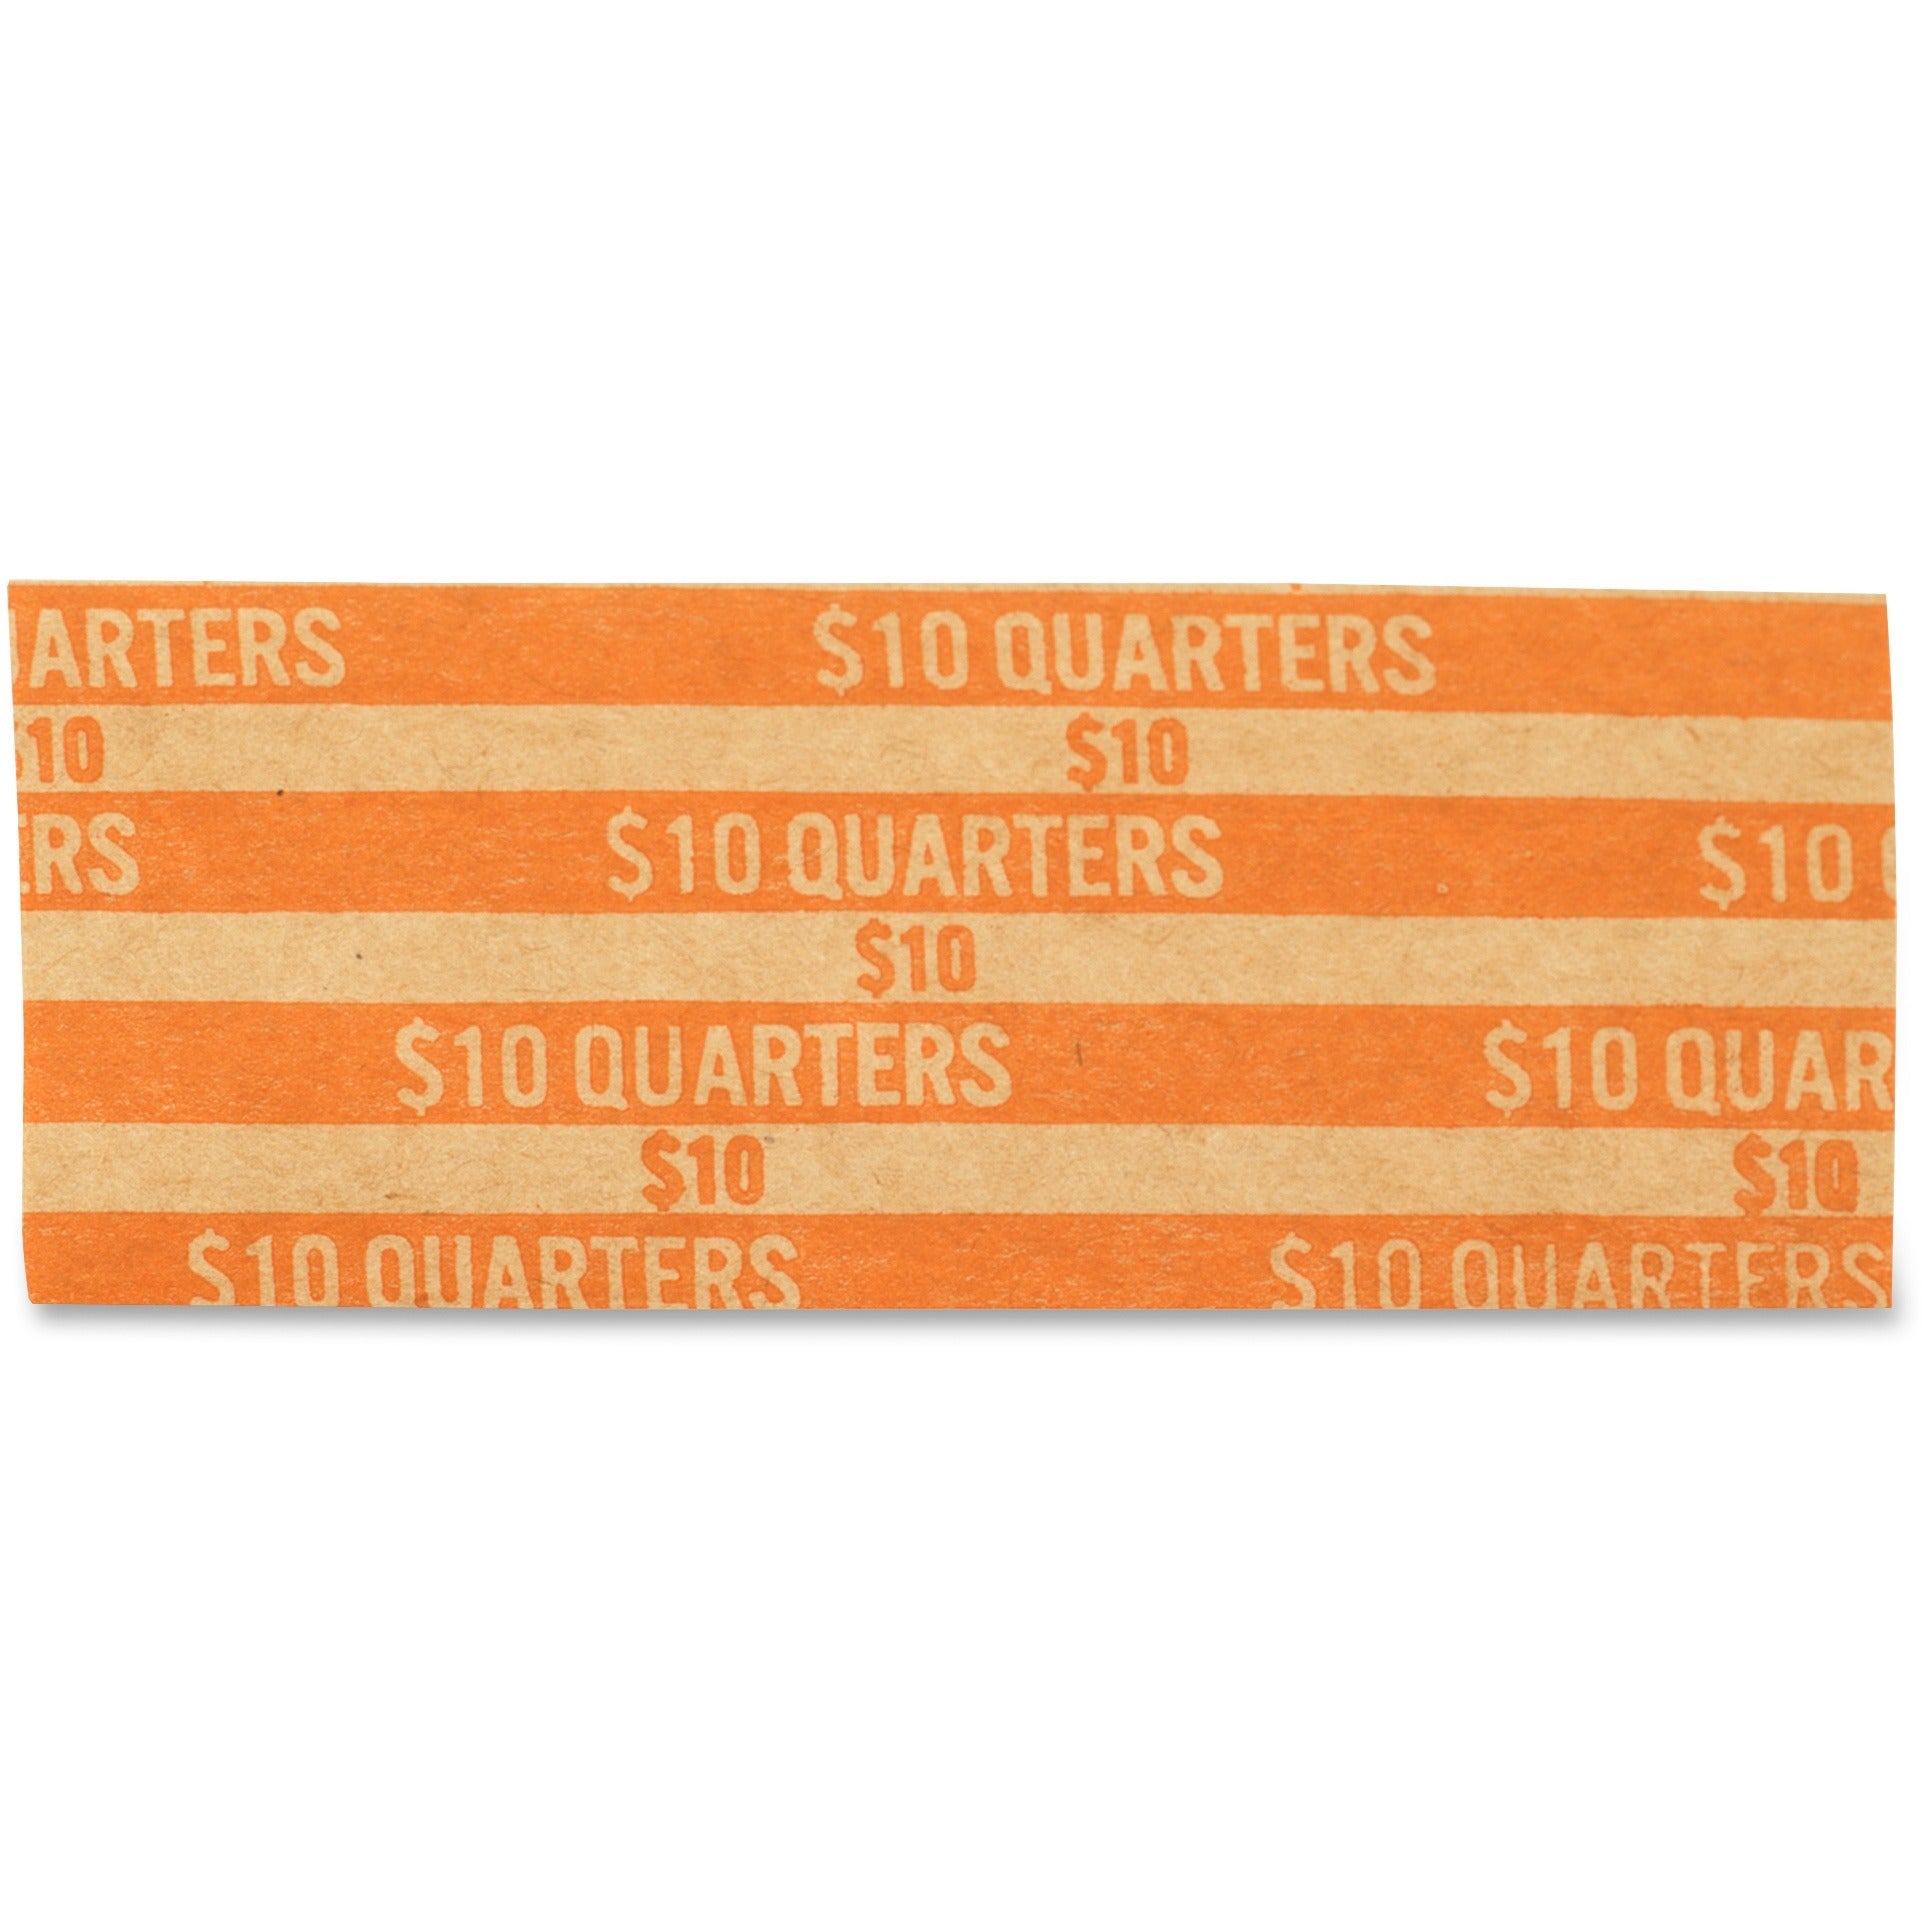 pap-r-flat-coin-wrappers-total-$10-in-40-coins-of-25-denomination-heavy-duty-paper-kraft-1000-box_pqp30025 - 2